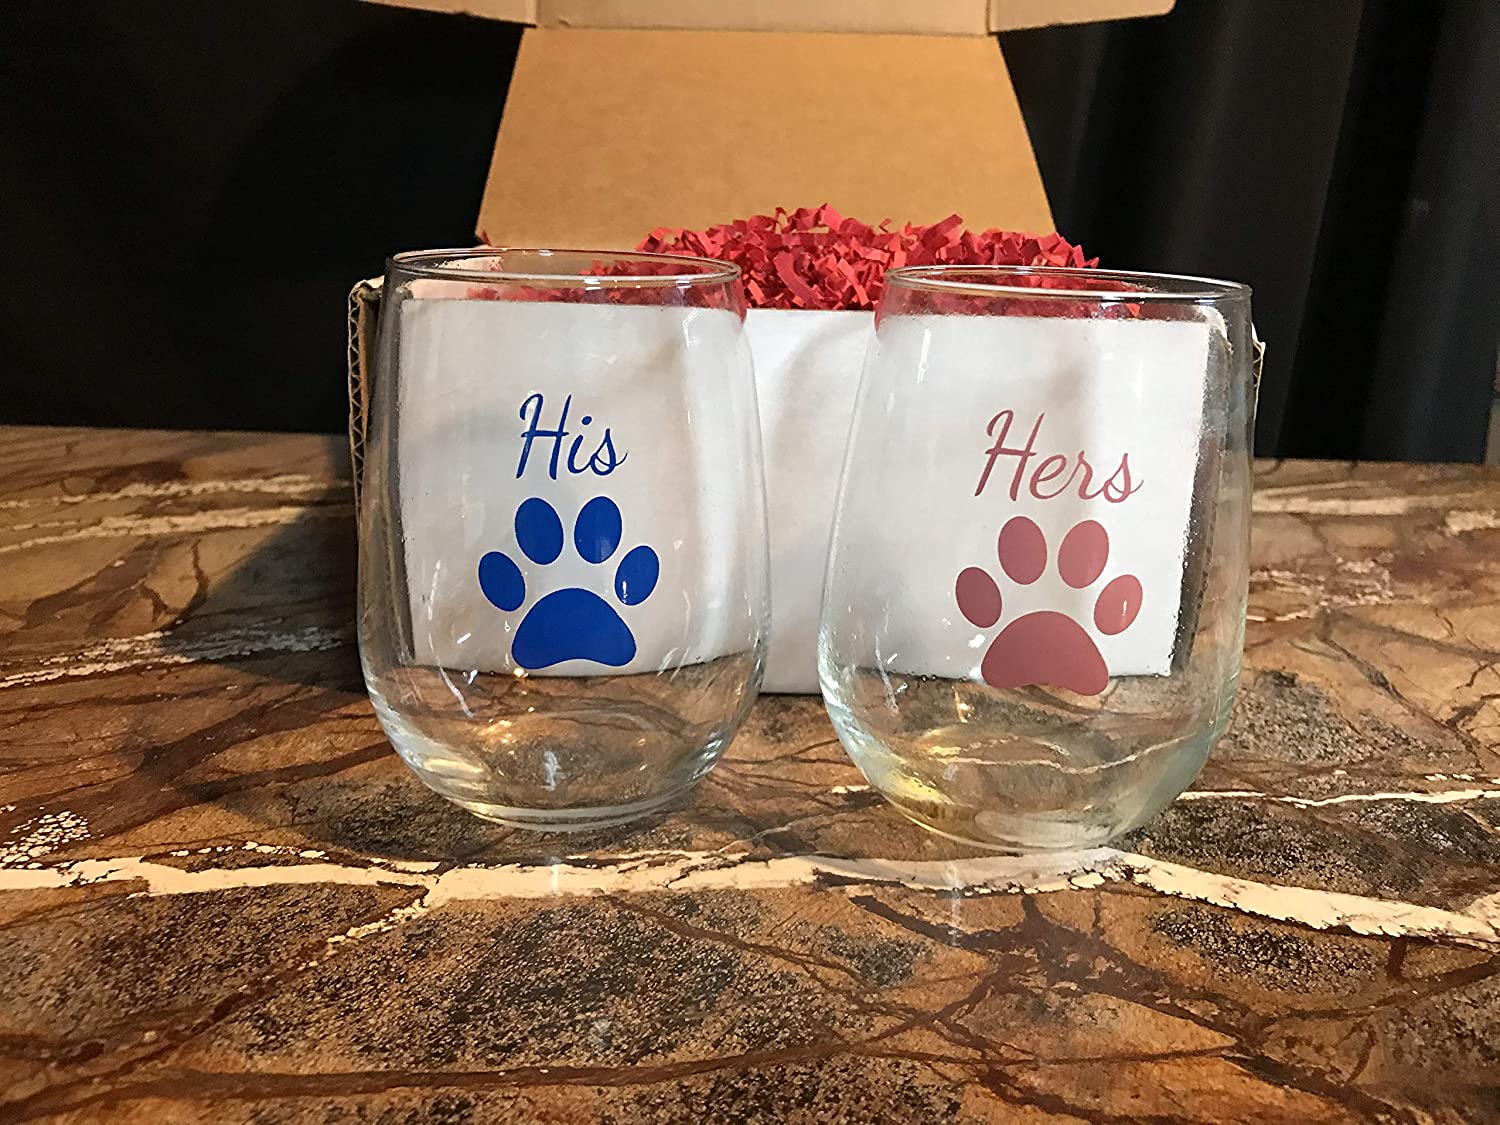 His and Hers Stemless Wine Glasses | Wine Glass Christmas Gift Set | Funny Engagement or Wedding Present | Perfect for Dog and Animal Lovers, Newlyweds, Anniversary Present, Bride & Groom or Mom & Dad